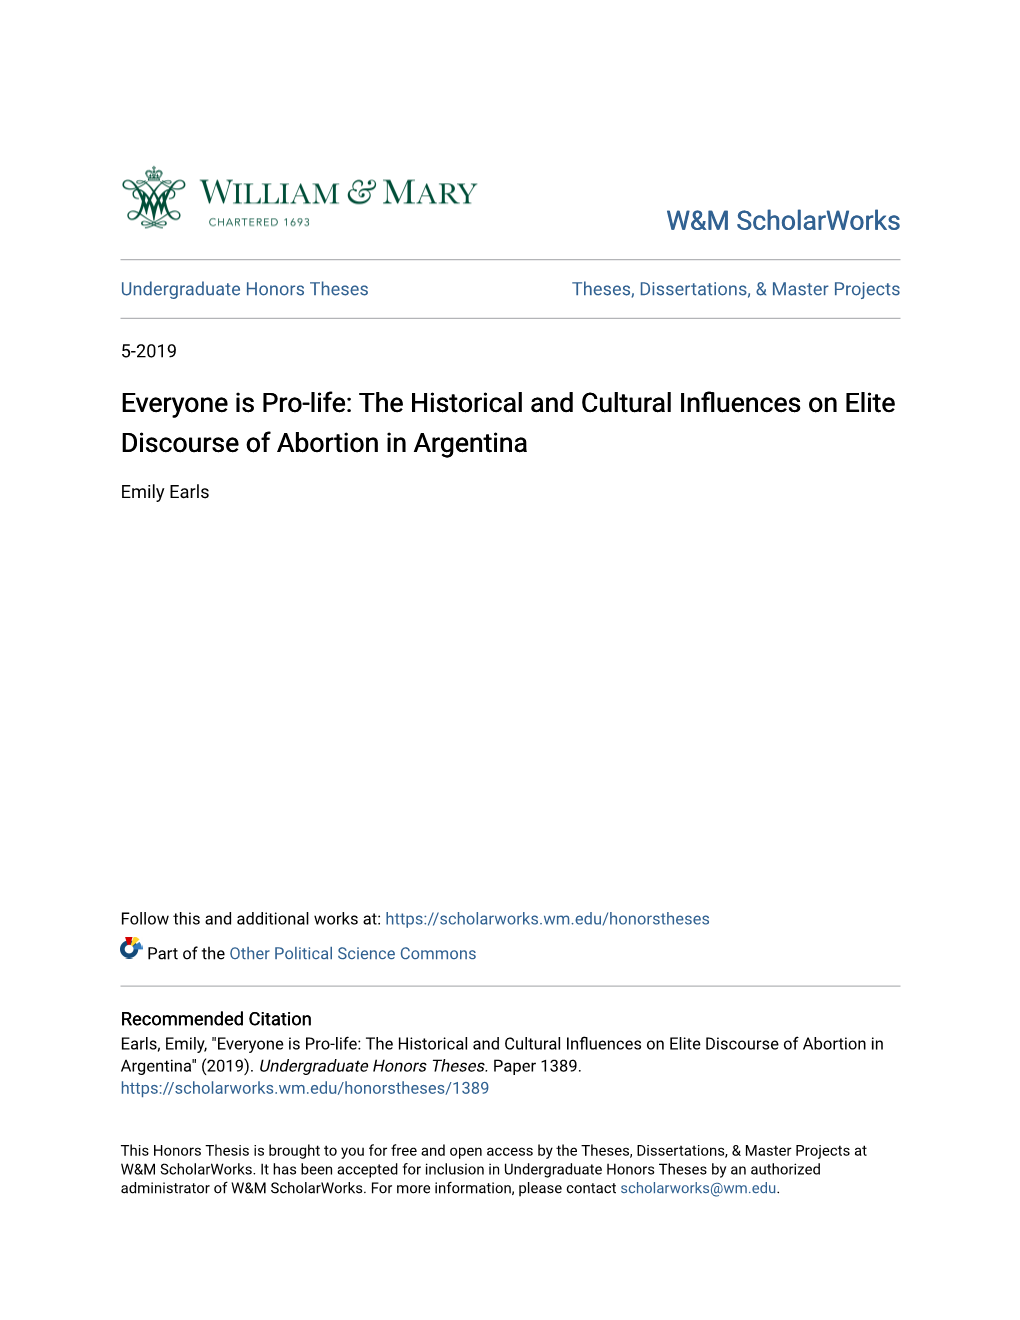 The Historical and Cultural Influences on Elite Discourse of Abortion in Argentina